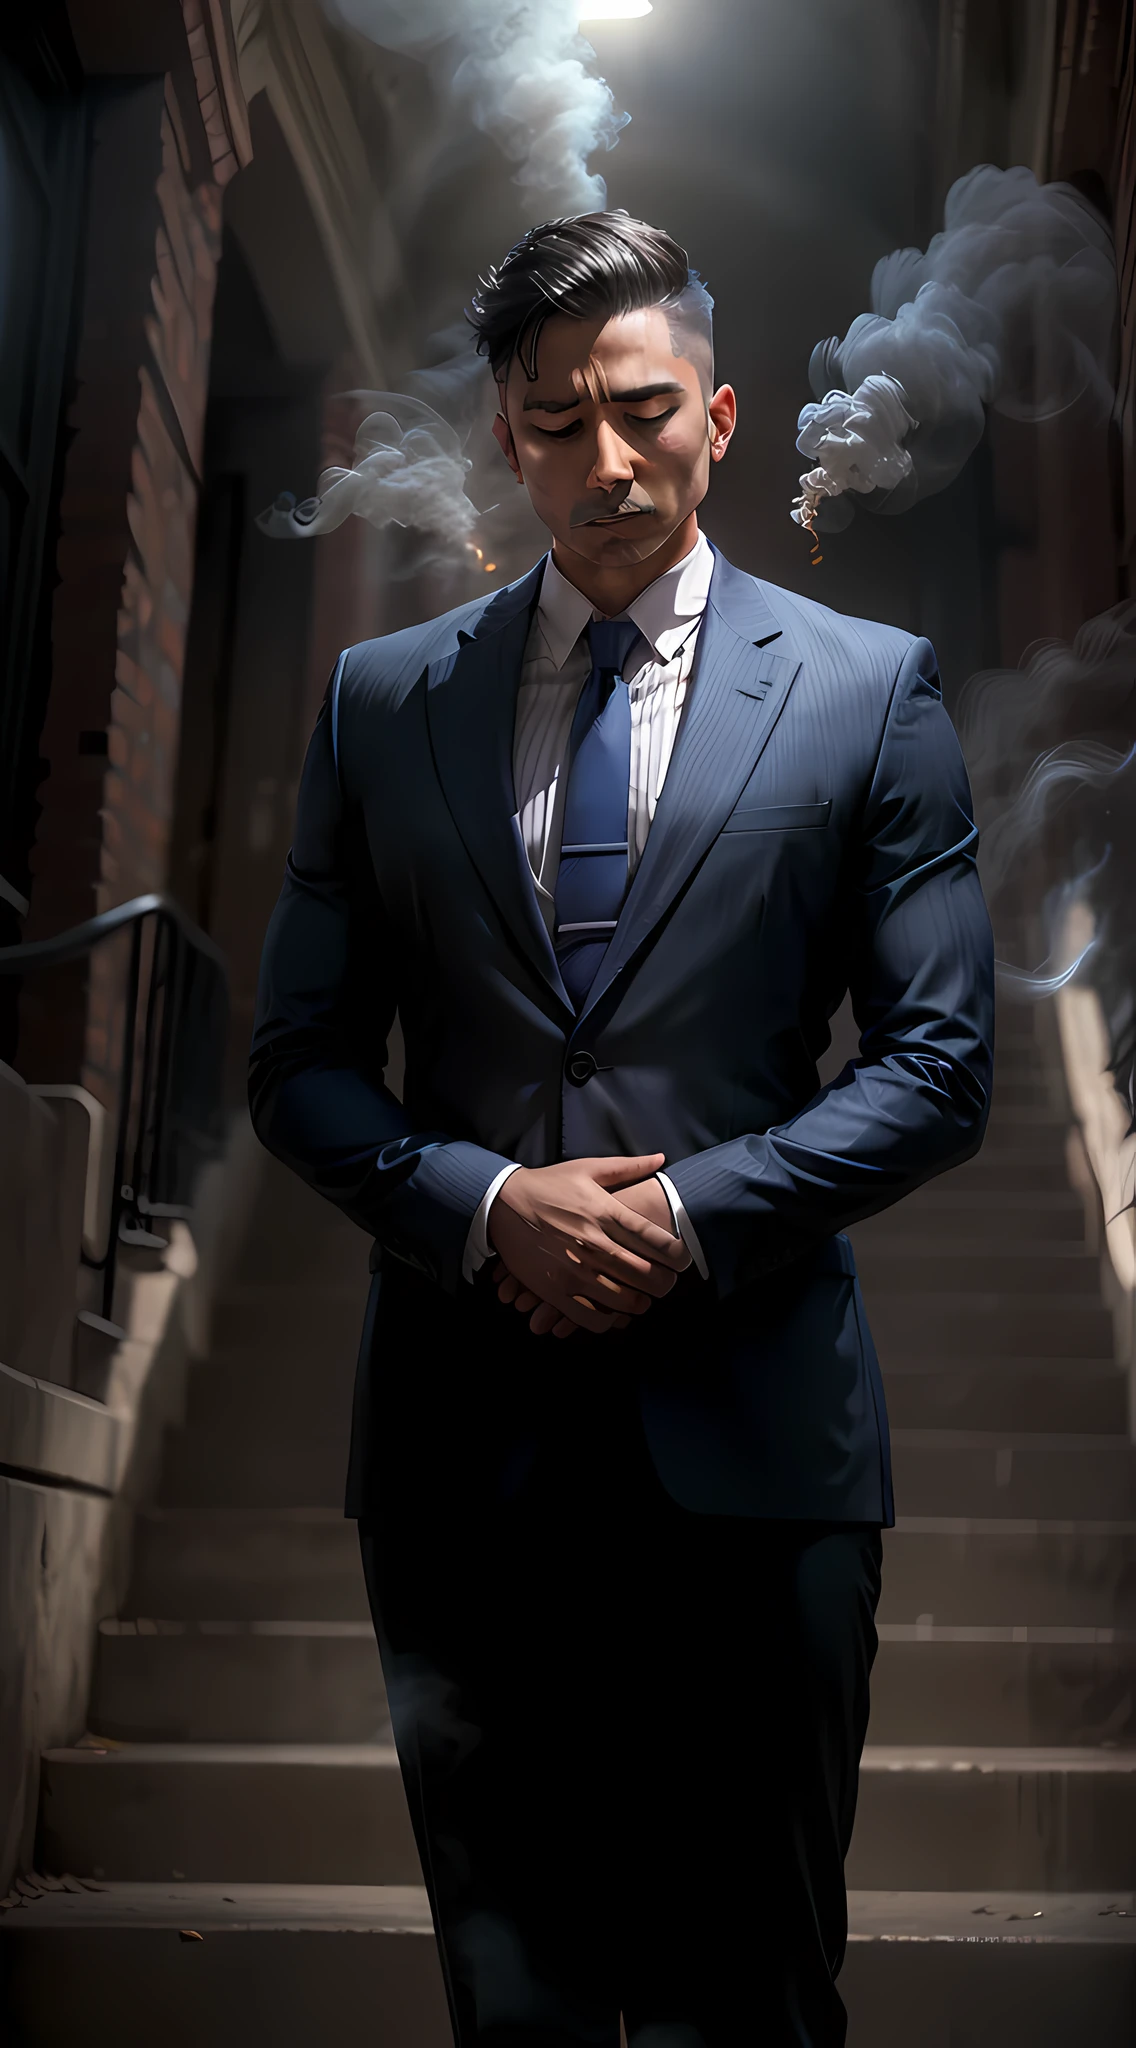 A man in a suit stands with his hands clasped praying with his eyes closed in front of his chest. He is surrounded by smoke and there are stairs in the background., ULTRA REALISTA